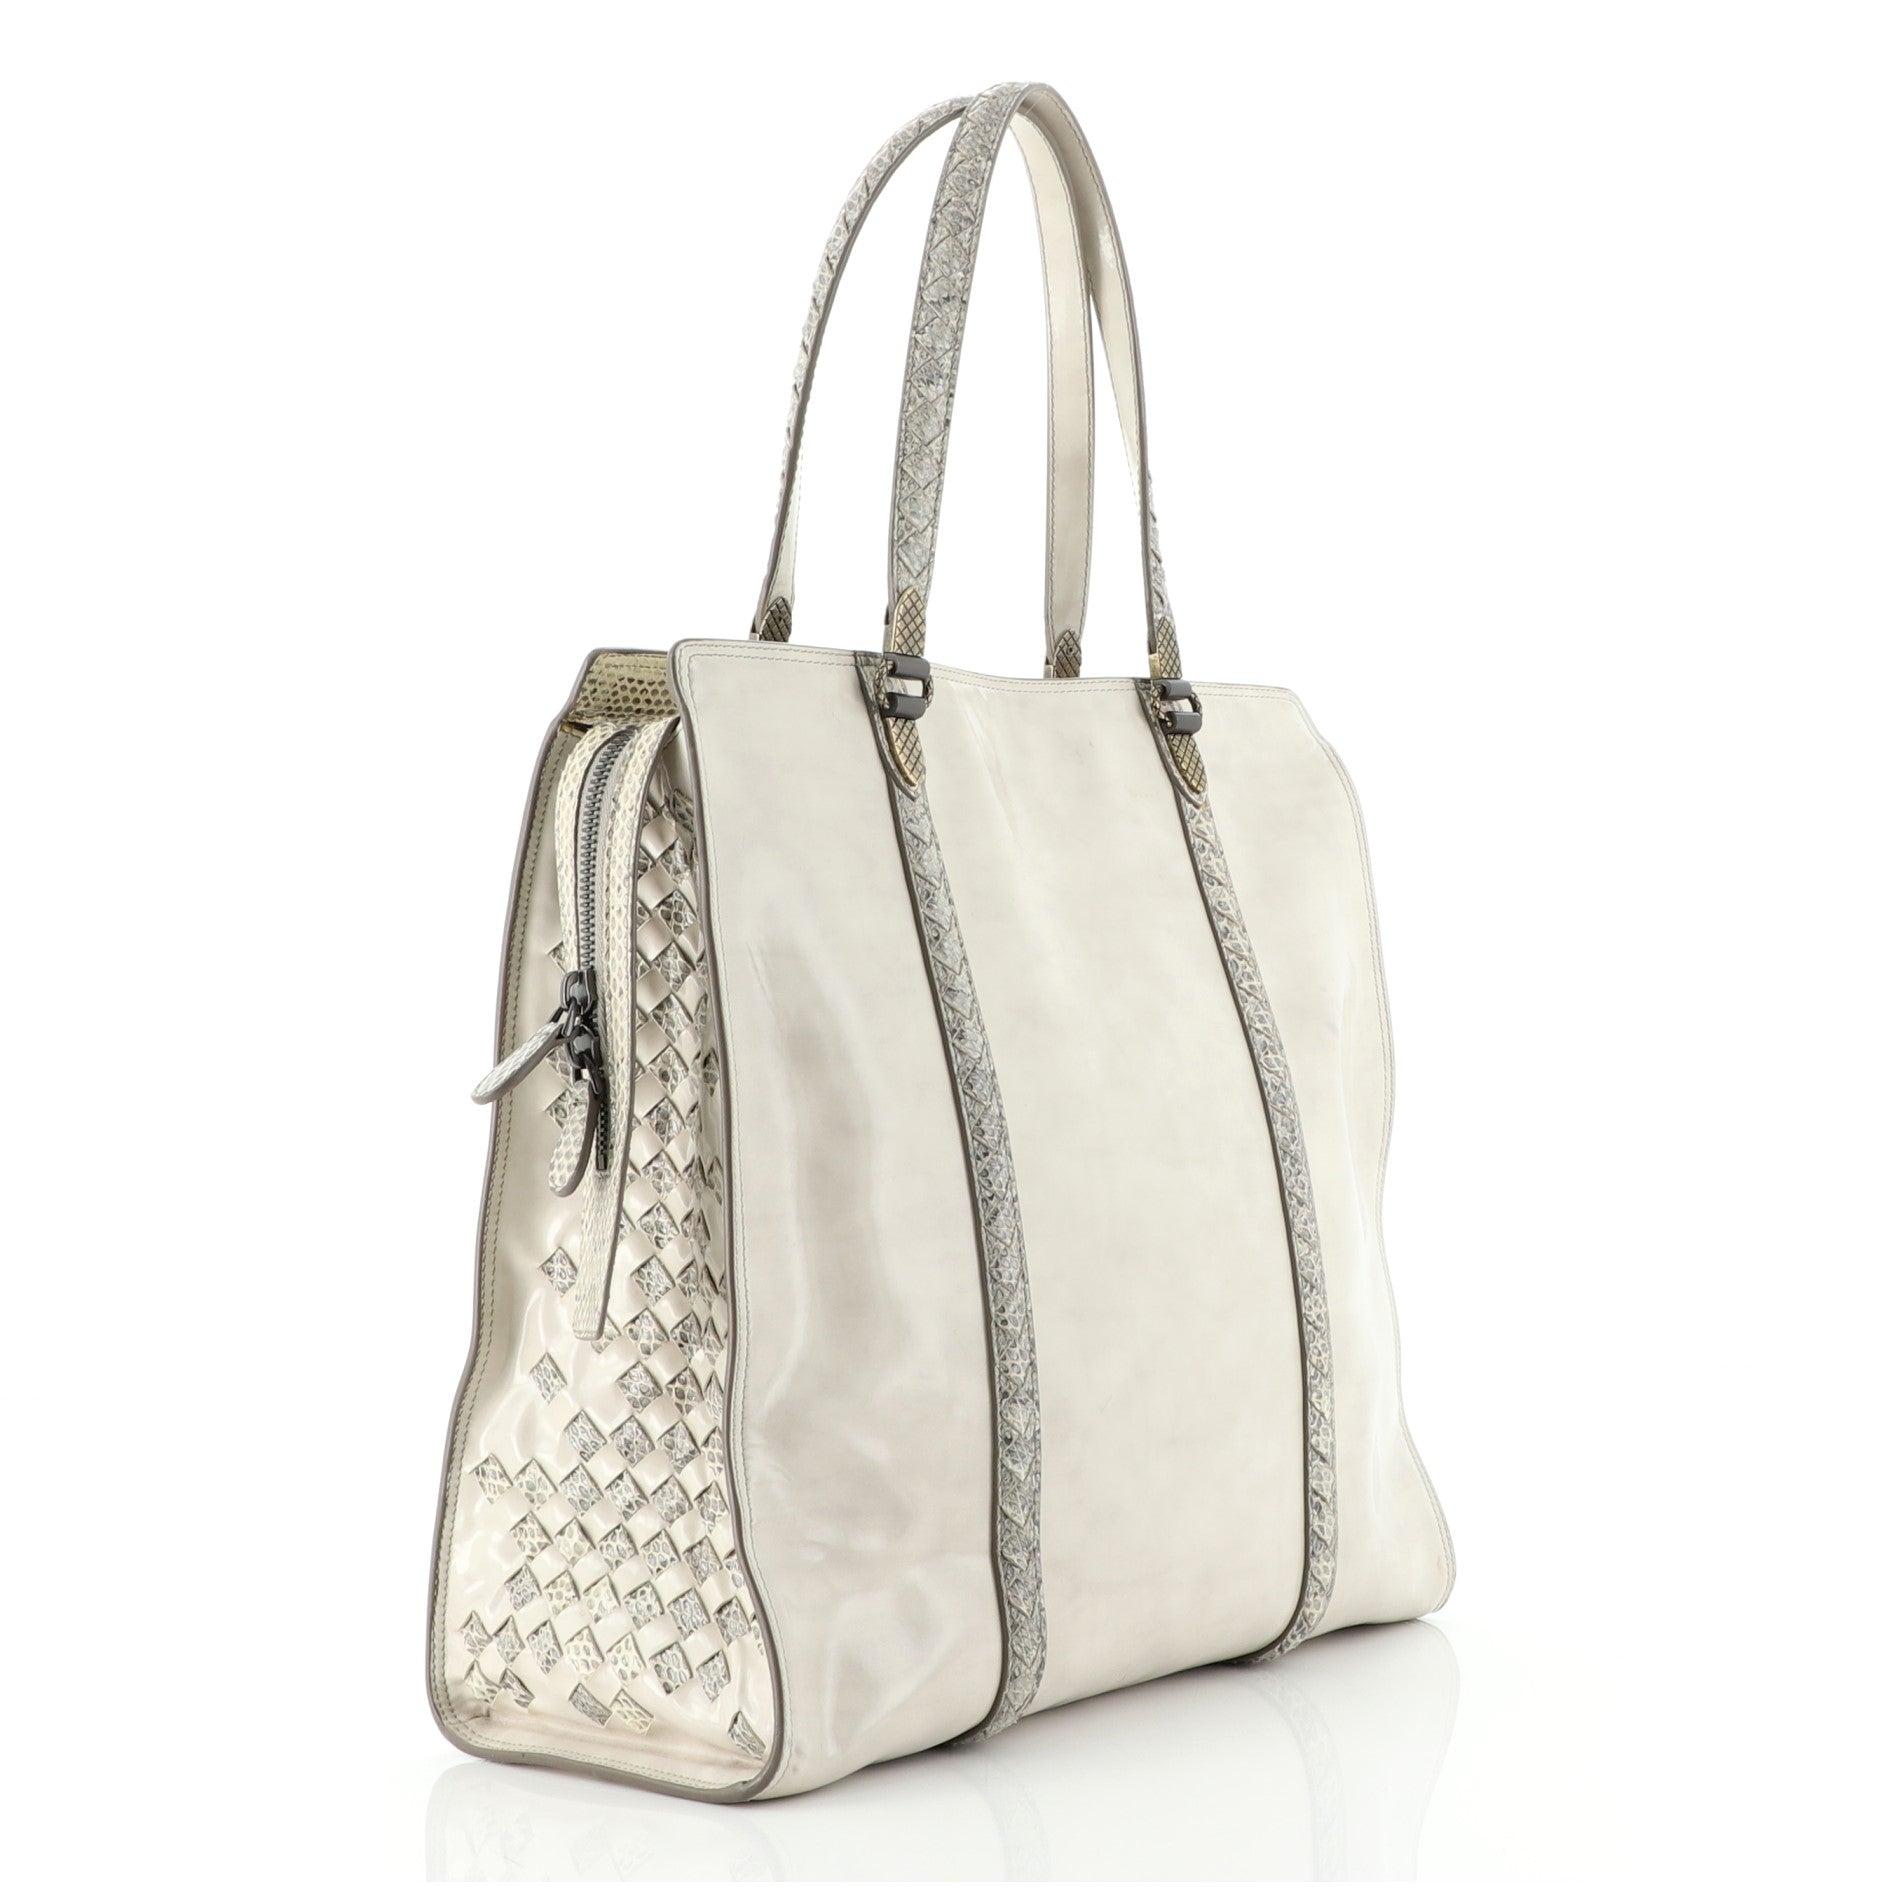 Bottega Veneta Tote Patent with Intrecciato Snakeskin Detail Tall
White Patent Intrecciato Leather

Condition Details: Minor wear and darkening on base corners, moderate creasing and marks on exterior, lifting of scales on snakeskin trims. Wear and